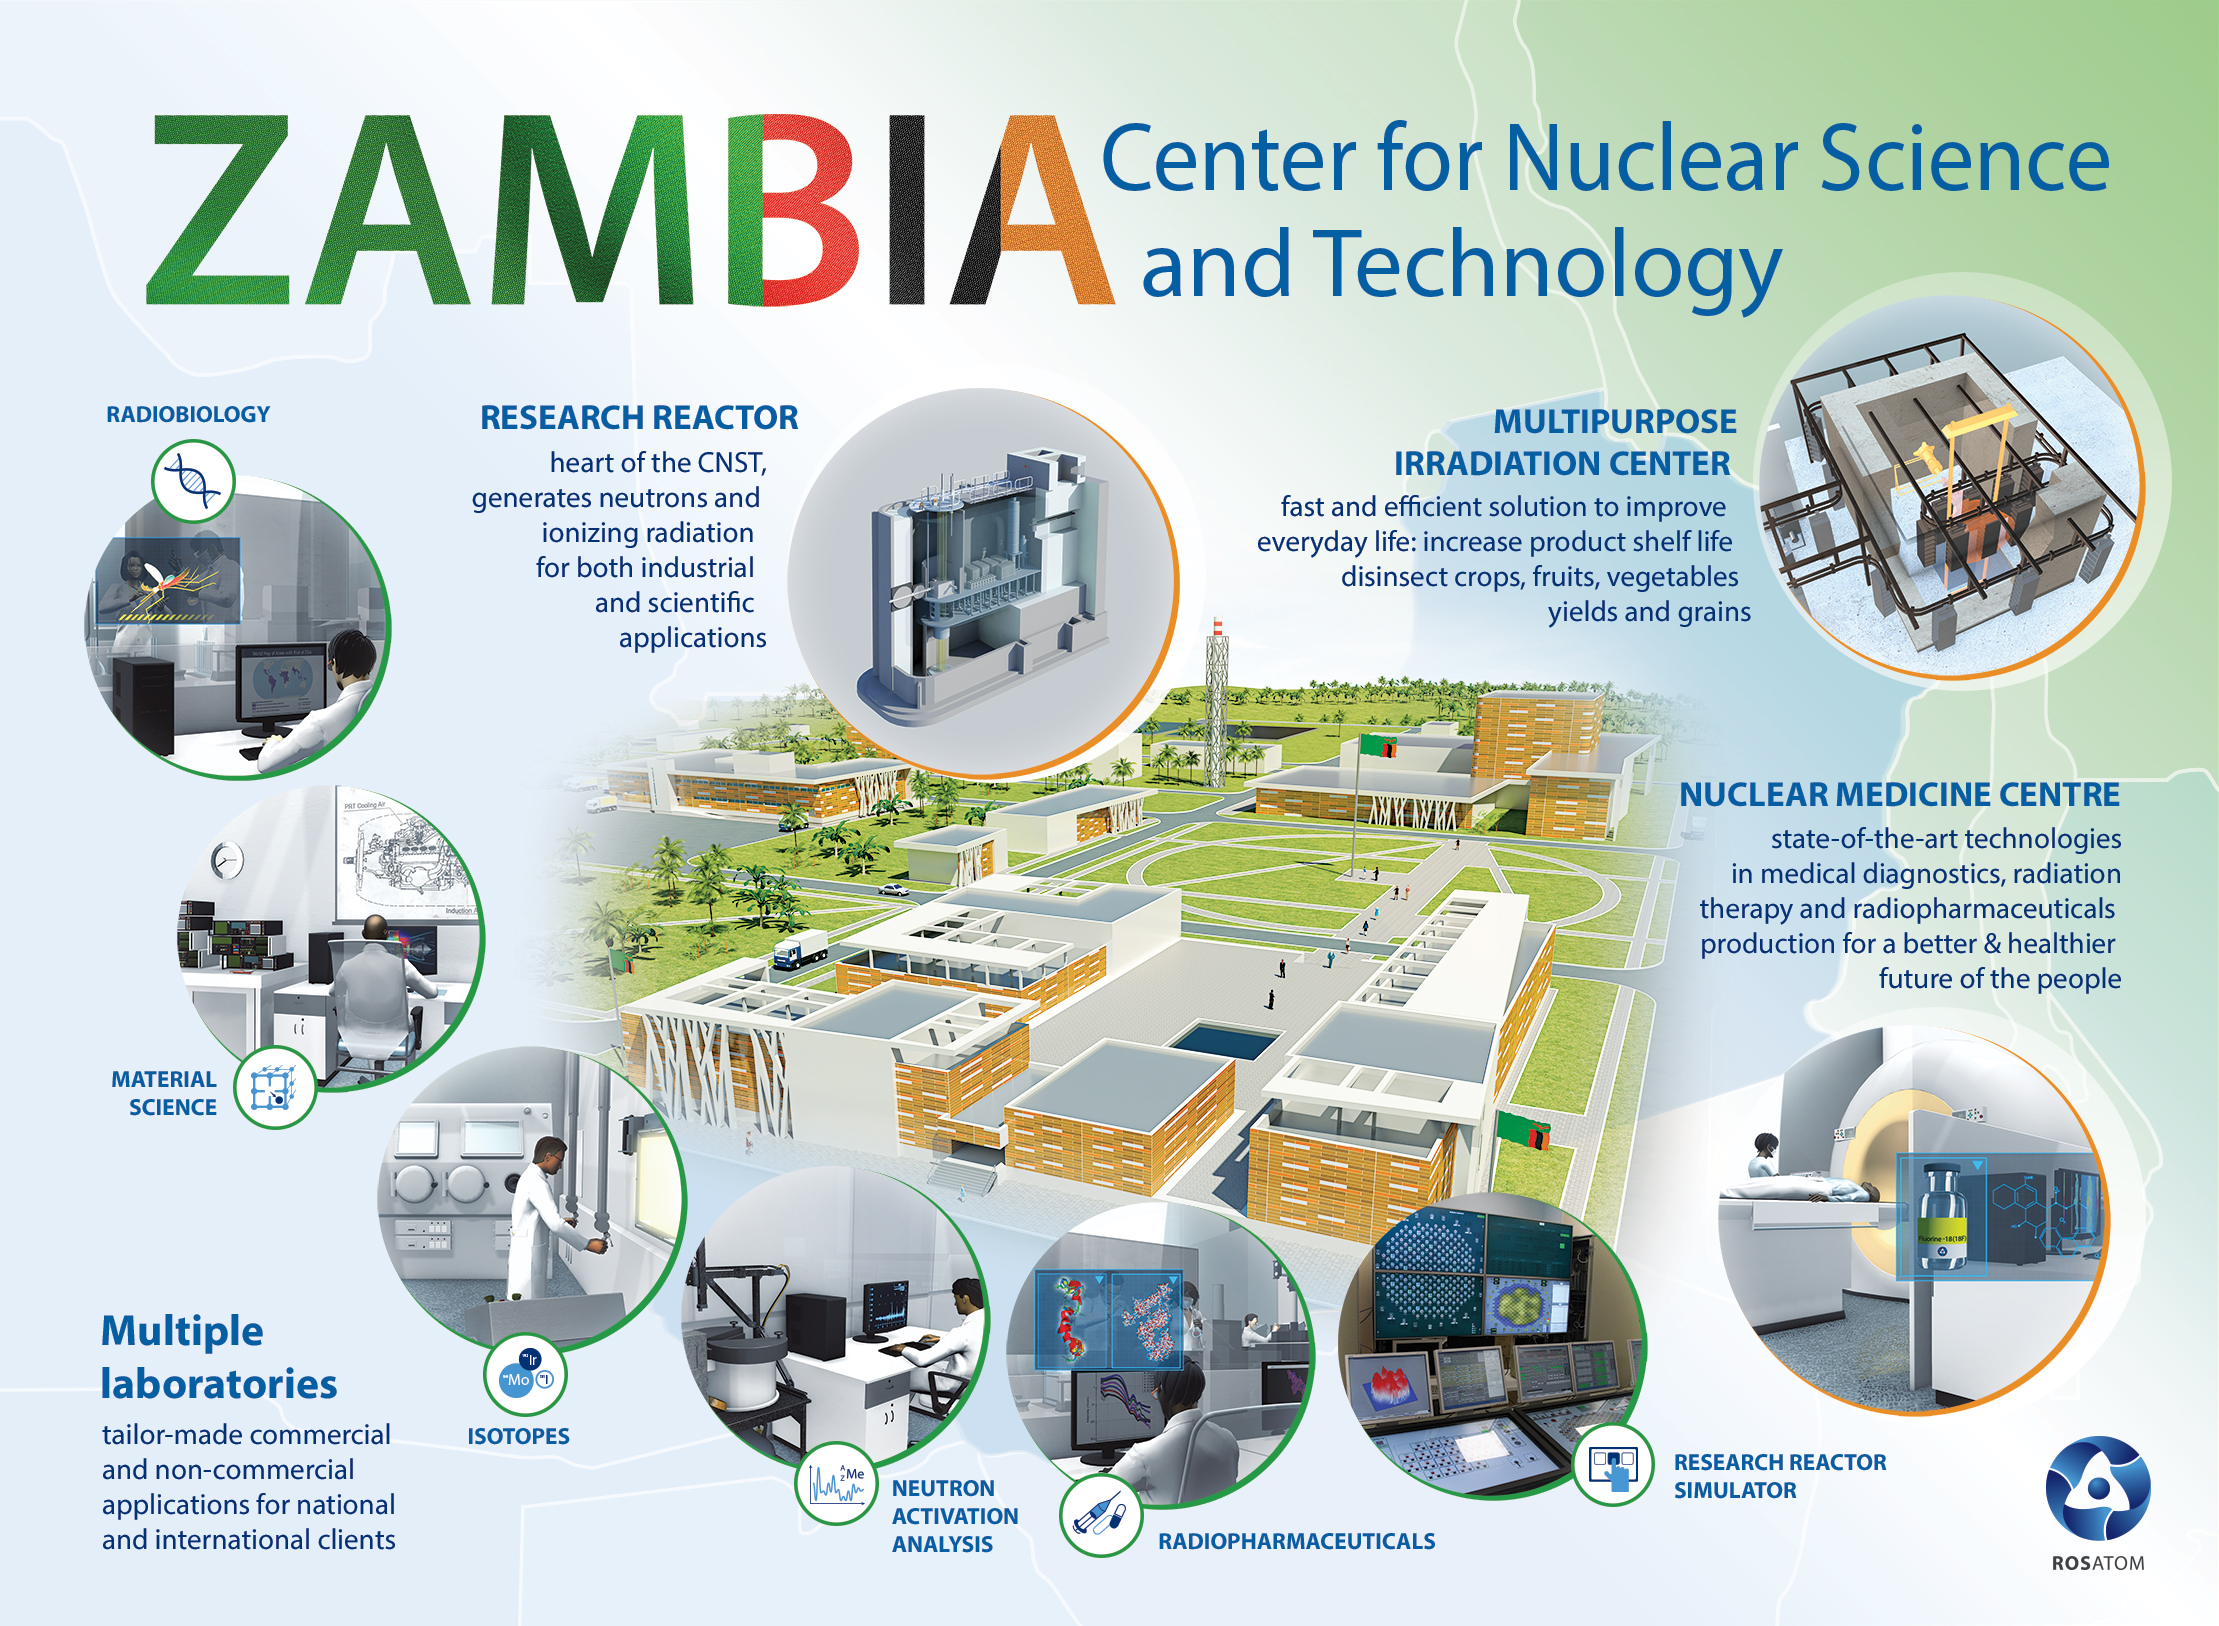 Zambia Center for Nuclear Science and Technology premiered at the largest Zambia trade show